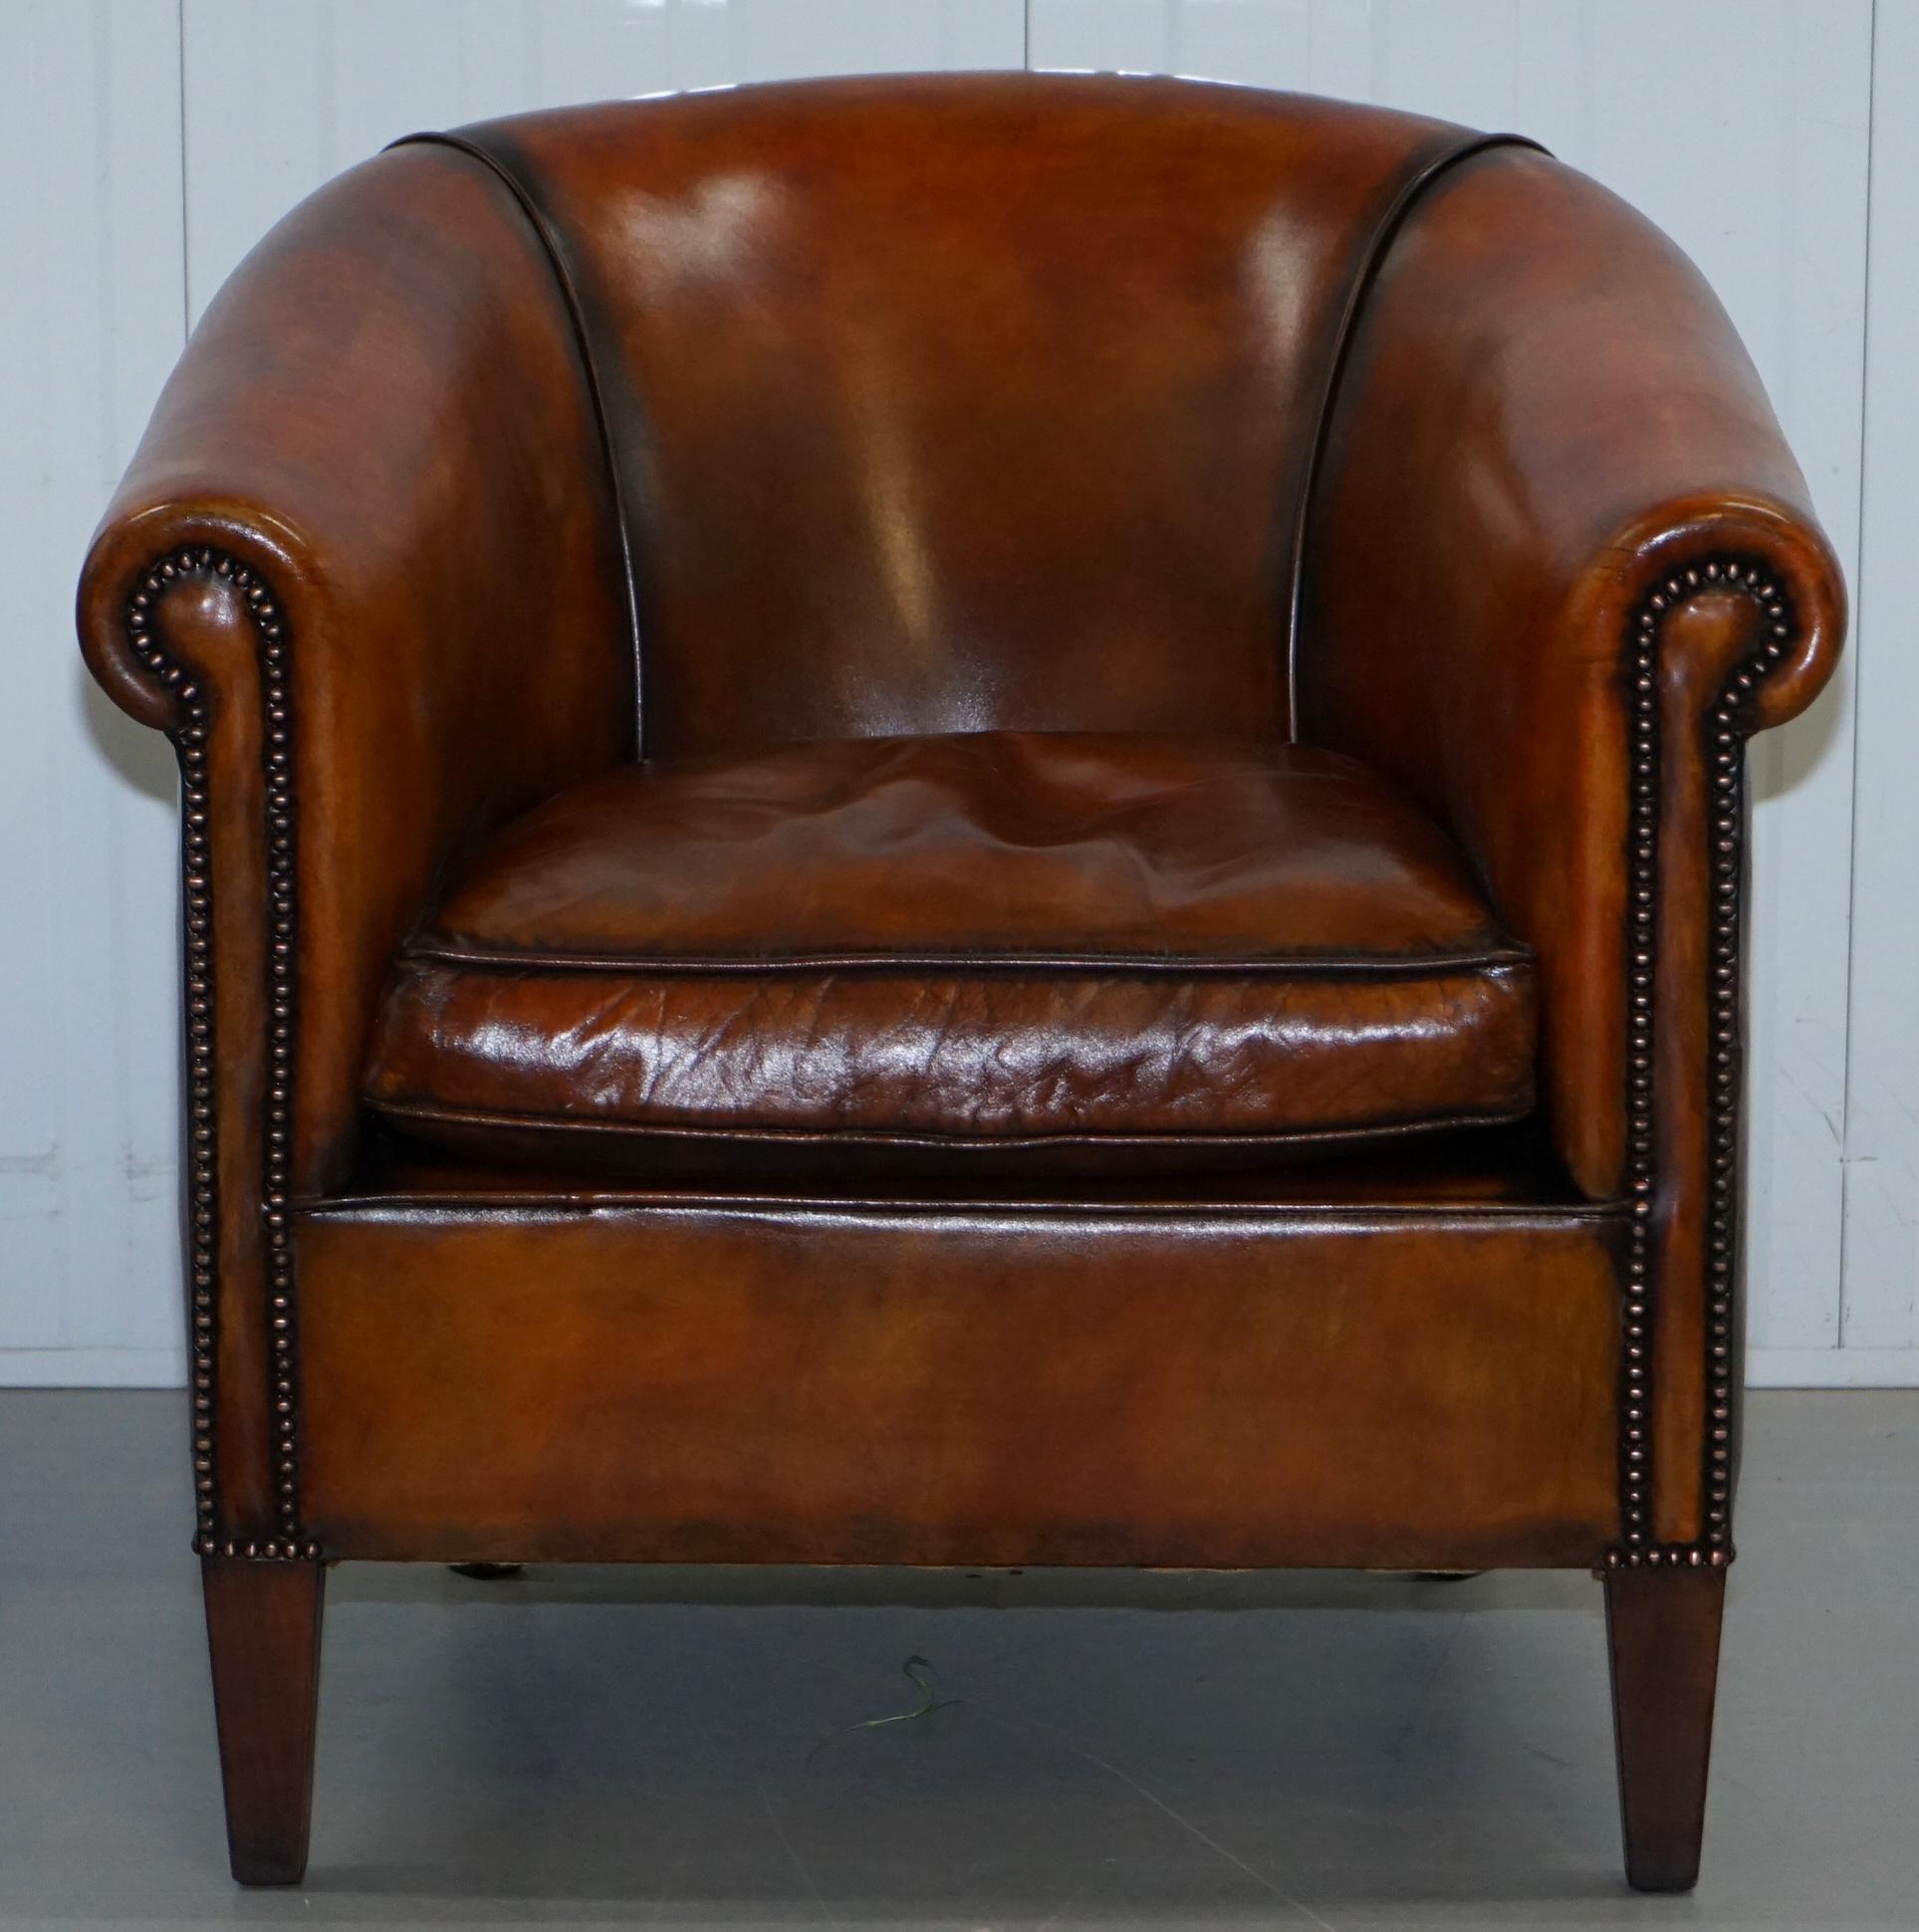 We are delighted to offer for sale this super cool fully restored James Bond 007 leather chairs of Bath Amersham armchair

In better than original condition as our leather polishers have stripped the chair back to the natural hide, its then been